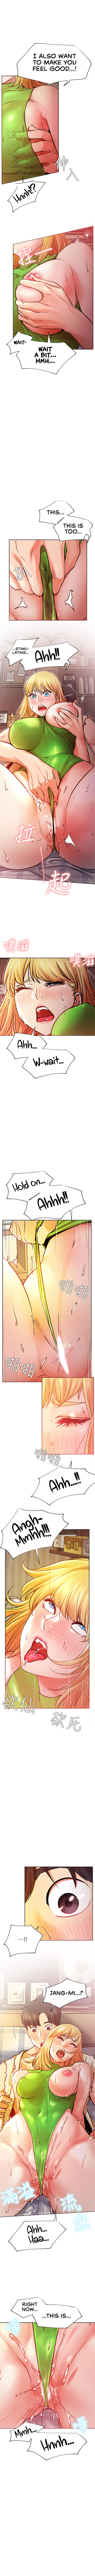 do-you-want-to-collab-chap-32-4